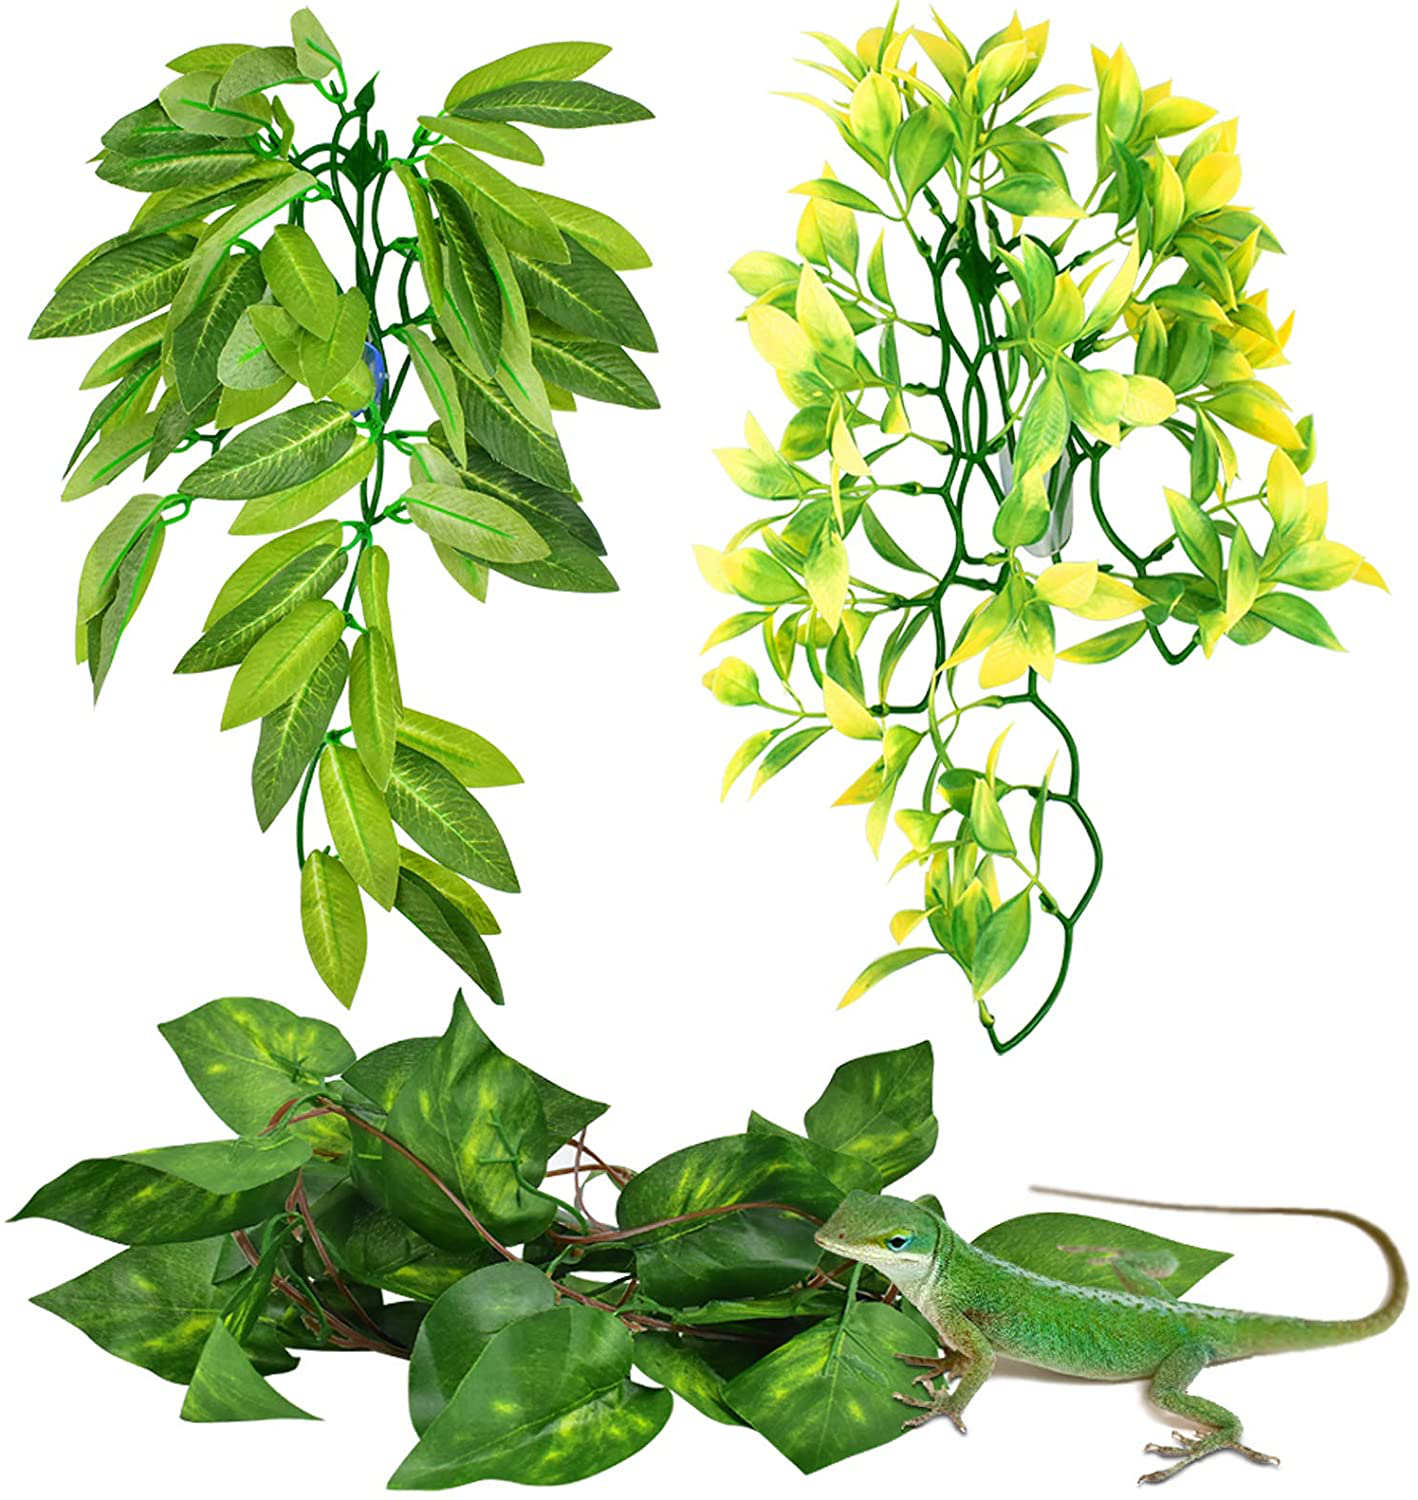 KATUMO Reptile Plants, Amphibian Hanging Plants with Suction Cup for Lizards, Geckos, Bearded Dragons, Snake, Hermit Crab Tank Pets Habitat Decorations Animals & Pet Supplies > Pet Supplies > Reptile & Amphibian Supplies > Reptile & Amphibian Substrates KATUMO Green+yellow  